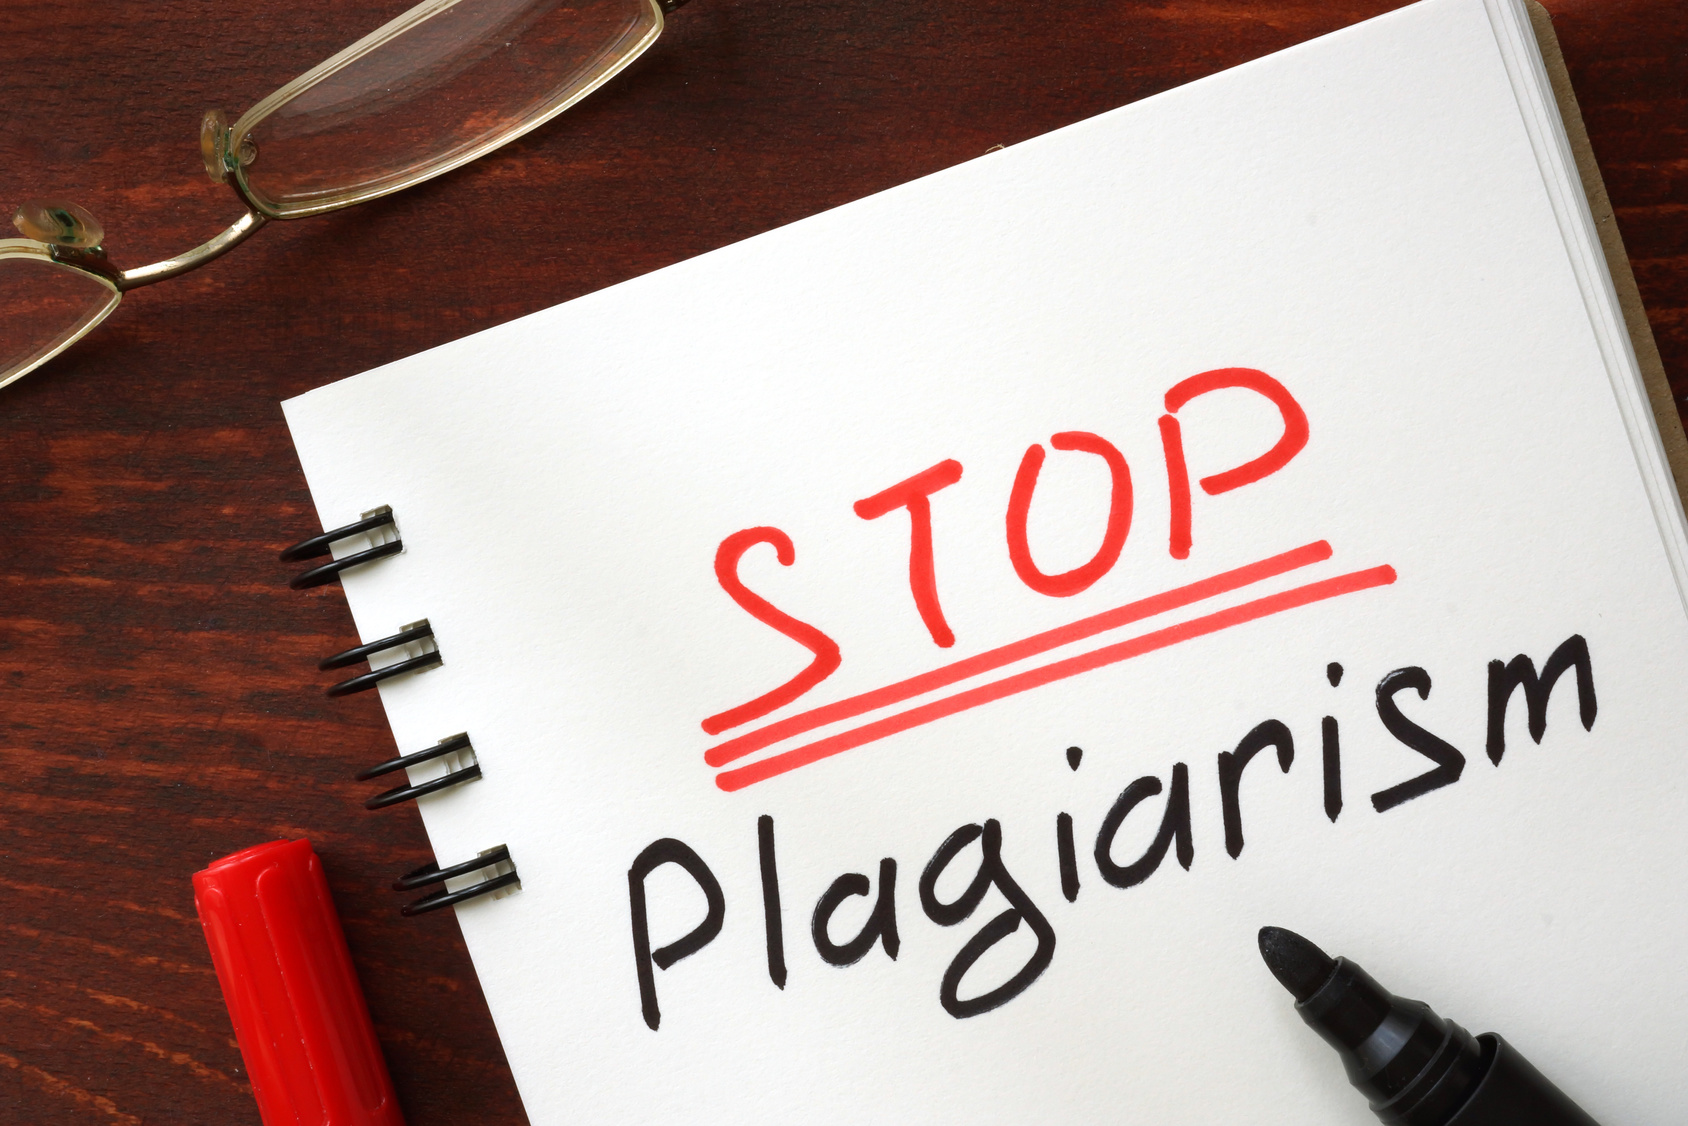 how to avoid plagiarism when writing an essay